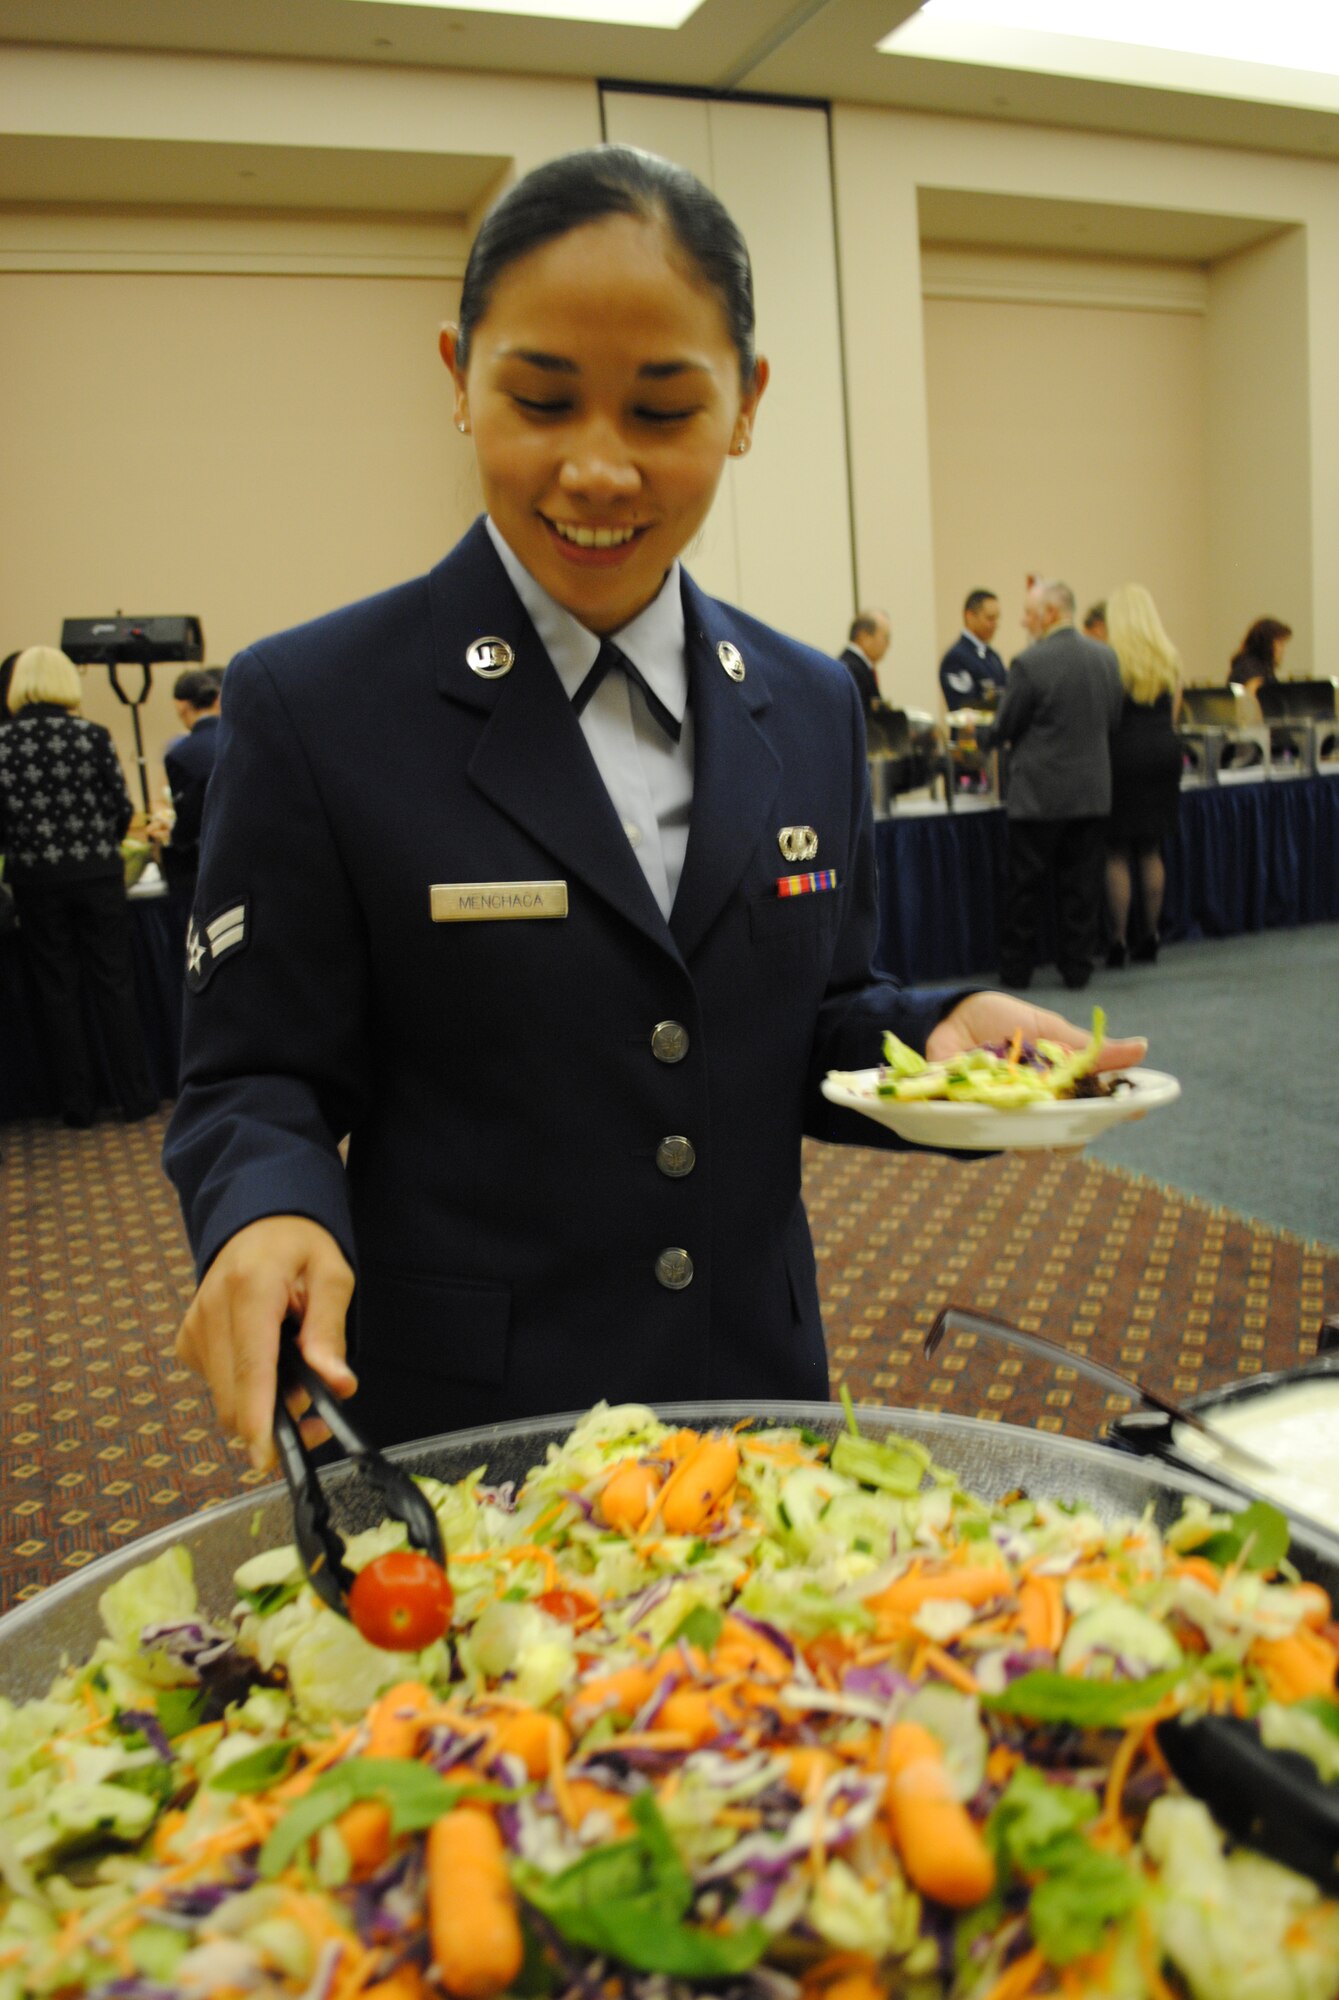 Airman 1st Class Katherine Menchaca from the 433rd Operational Support Squadron, prepares a personal salad during the 433rd Airlift Wing 60th Anniversary Dinner held Sept. 10, 2011, at the Gateway Club on Lackland Air Force Base, Texas. Gateway Club Executive Chef Lazaro Carrazco and his team of three cooks prepared a buffet-style meal for more than 475 guests in less than 24 hours. The meal included options such as glazed pork loin, chicken with a sage and white wine sauce, chocolate mousse, steamed vegetable medley and apple cobbler. (U.S. Air Force photo/Senior Airman Luis Loza Gutierrez)